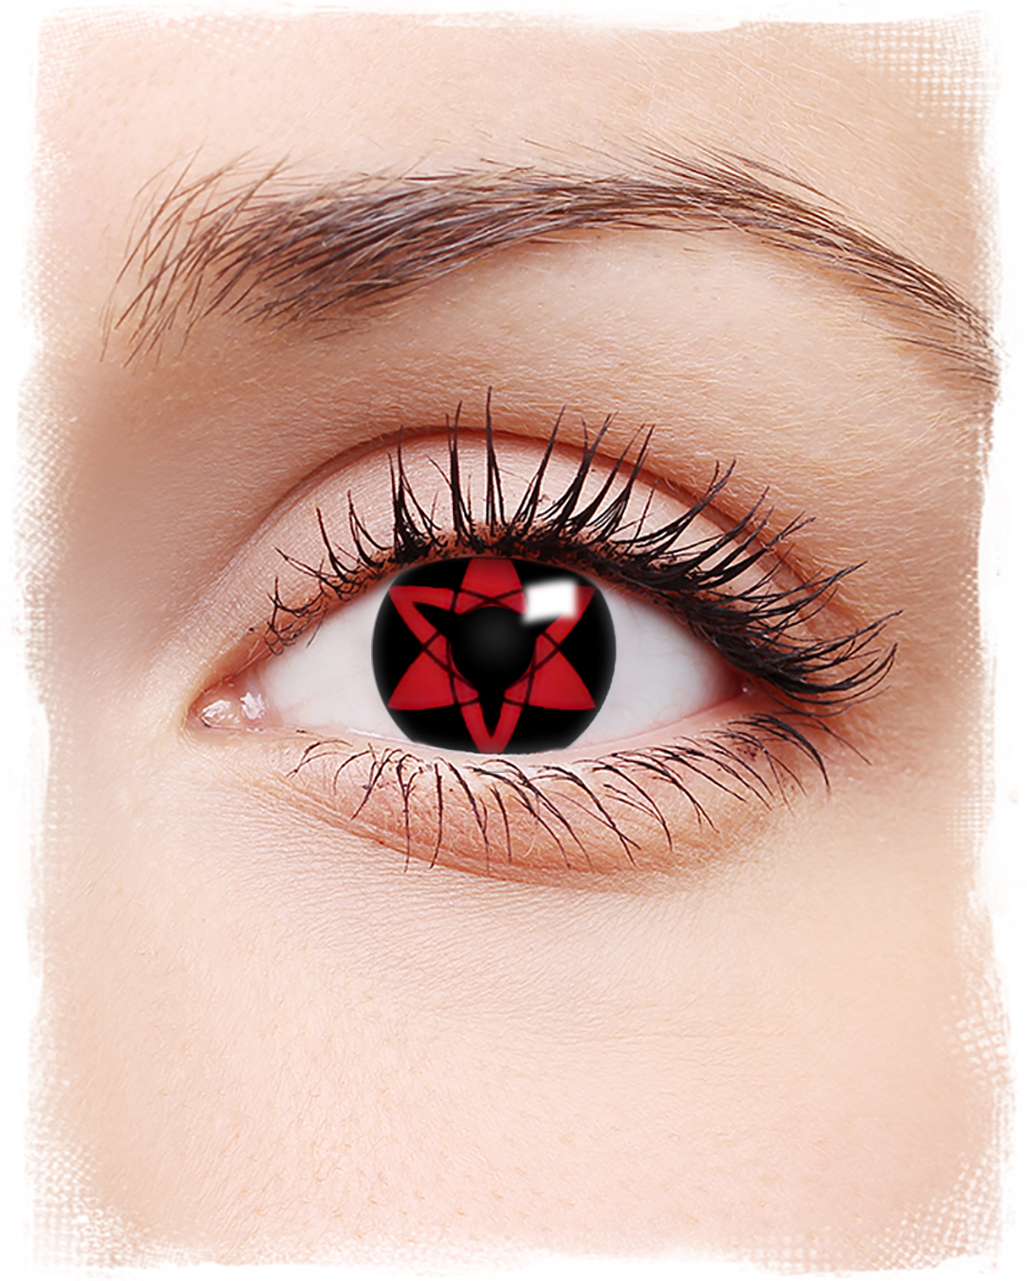 Cosplay Contact Lenses, Anime Inspired Contacts – PRIMAL ® Contact Lenses